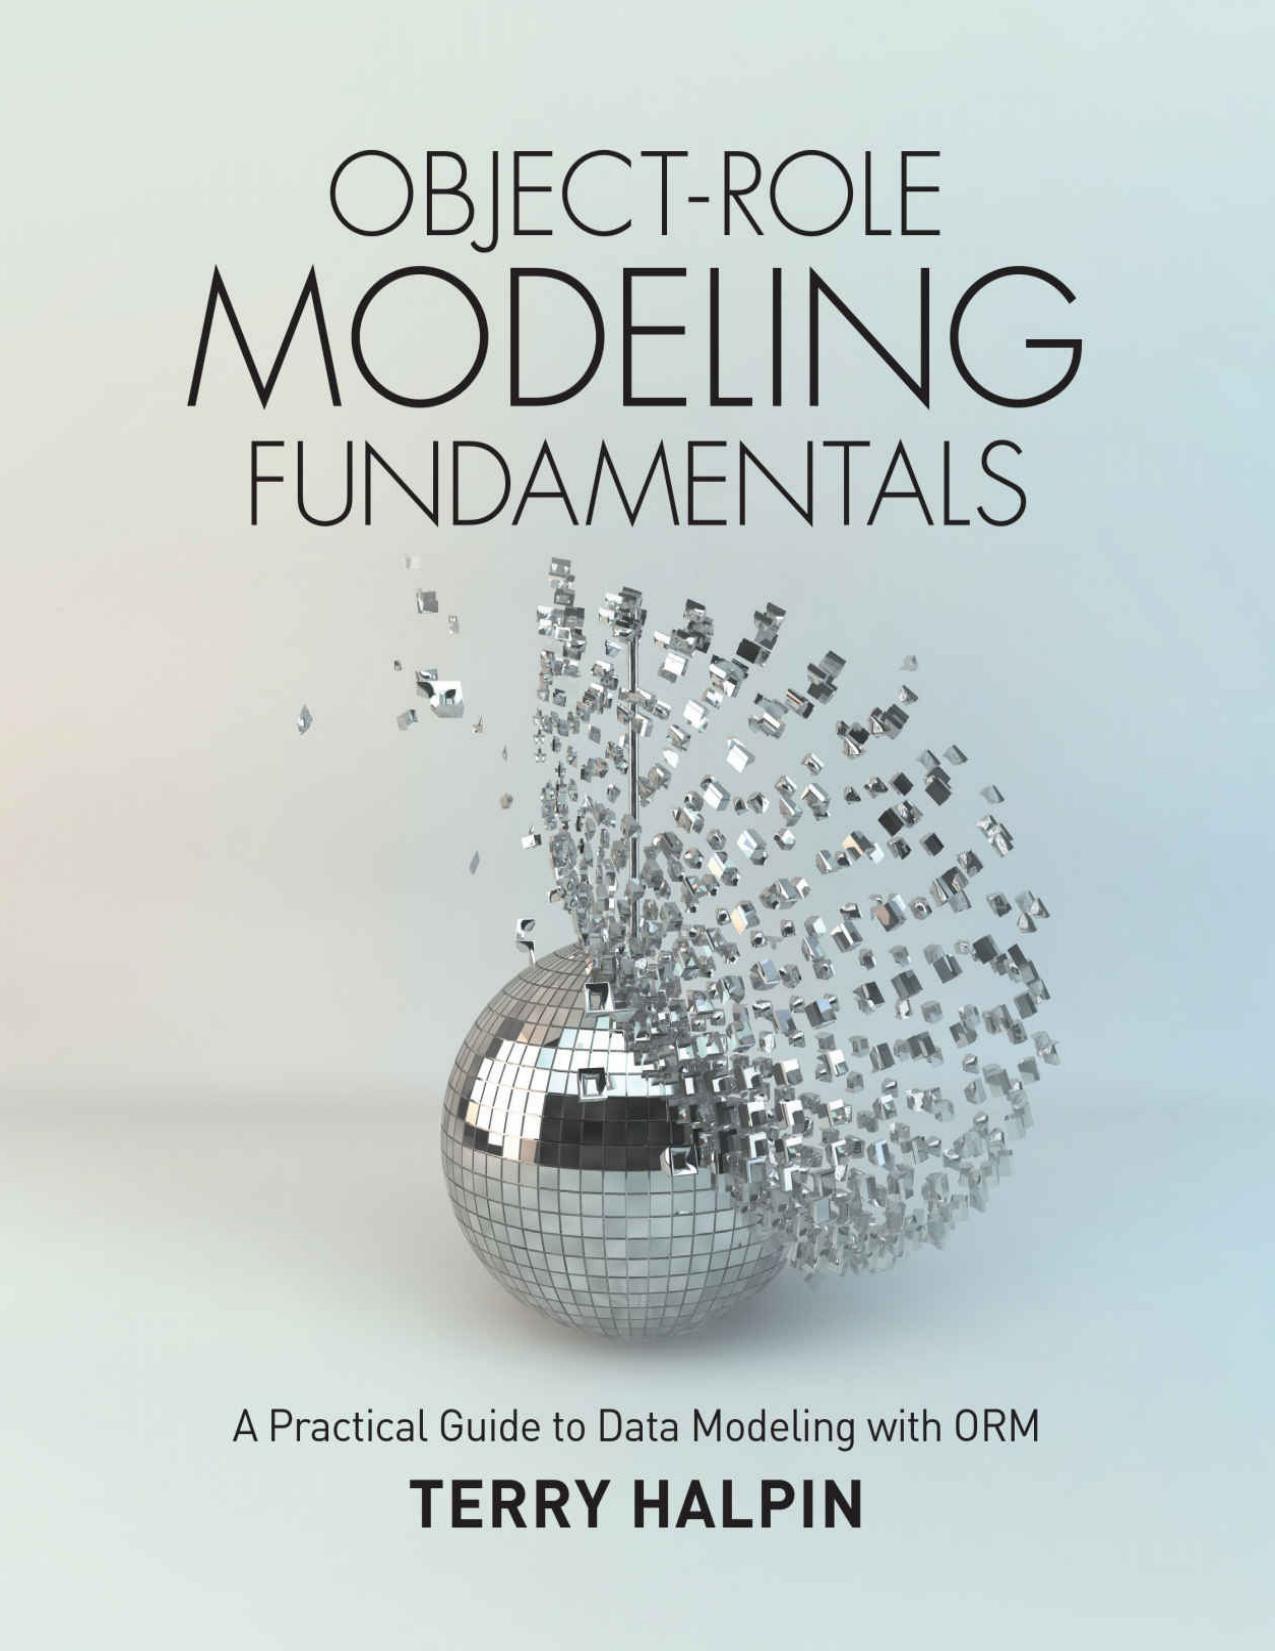 Object-Role Modeling Fundamentals: A Practical Guide to Data Modeling with ORM by Terry Halpin